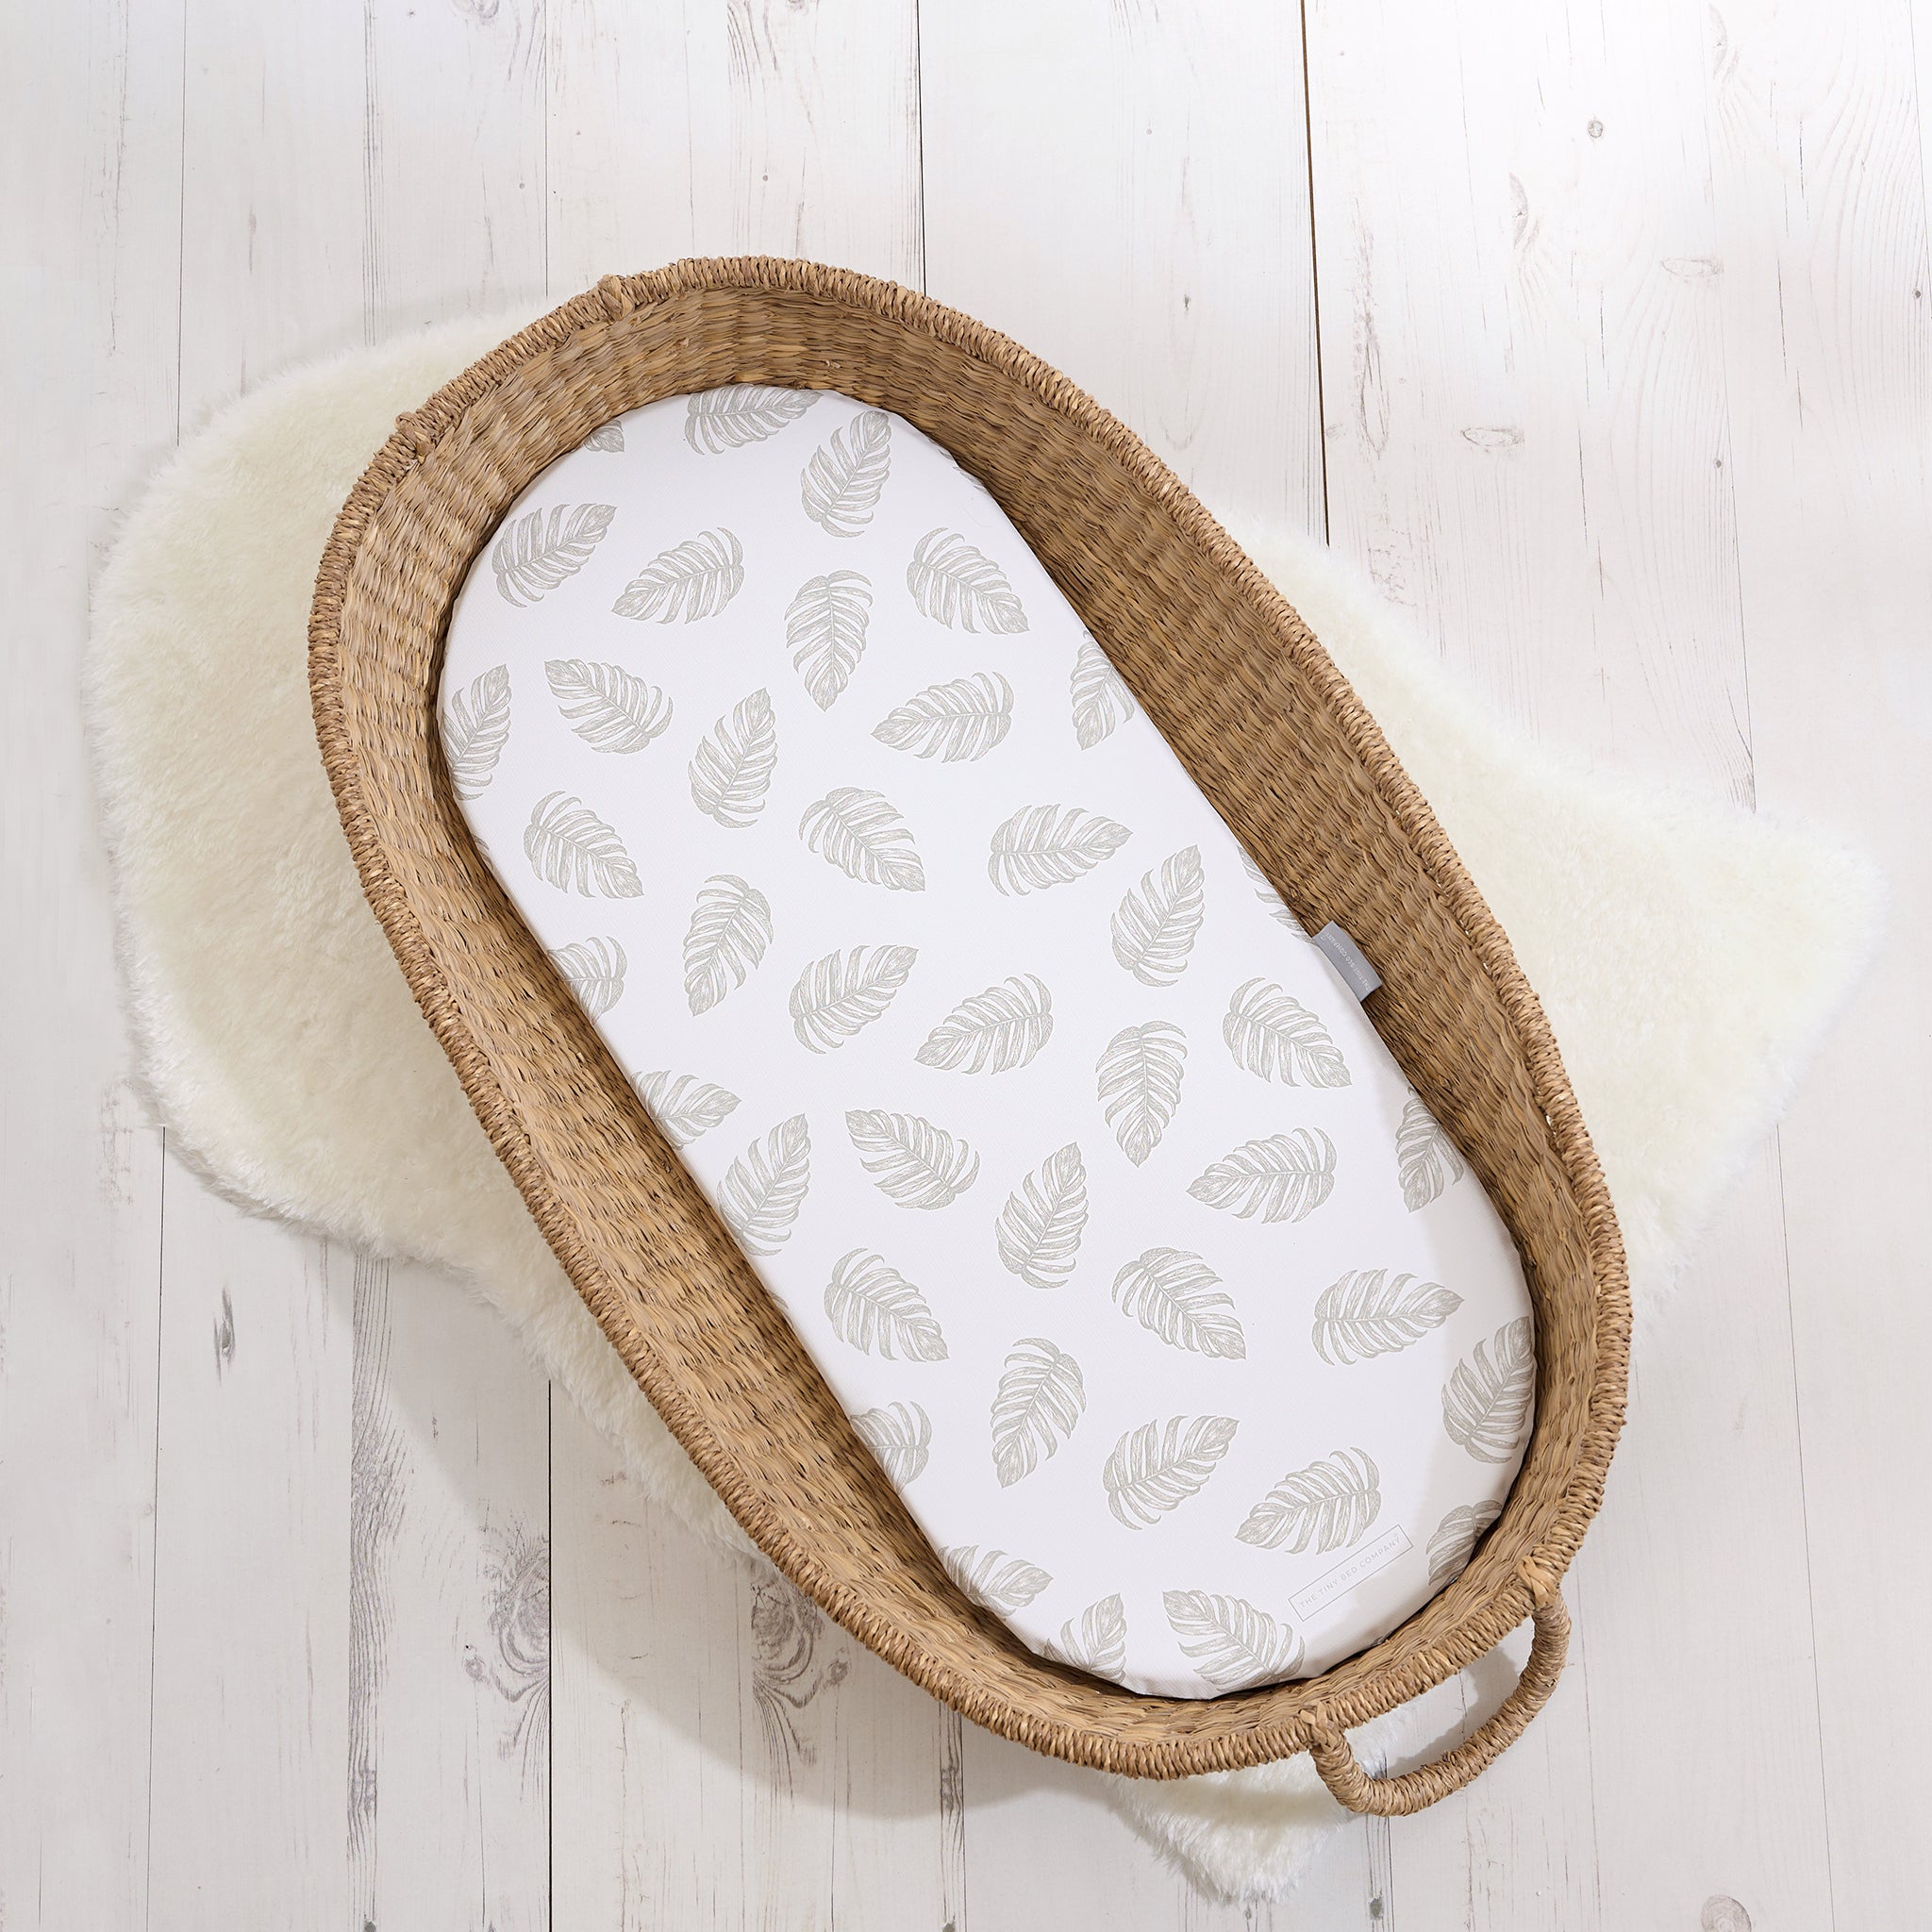 Basket Changing Mat - Palm Bay (Natural Stone) - The Tiny Bed Company™